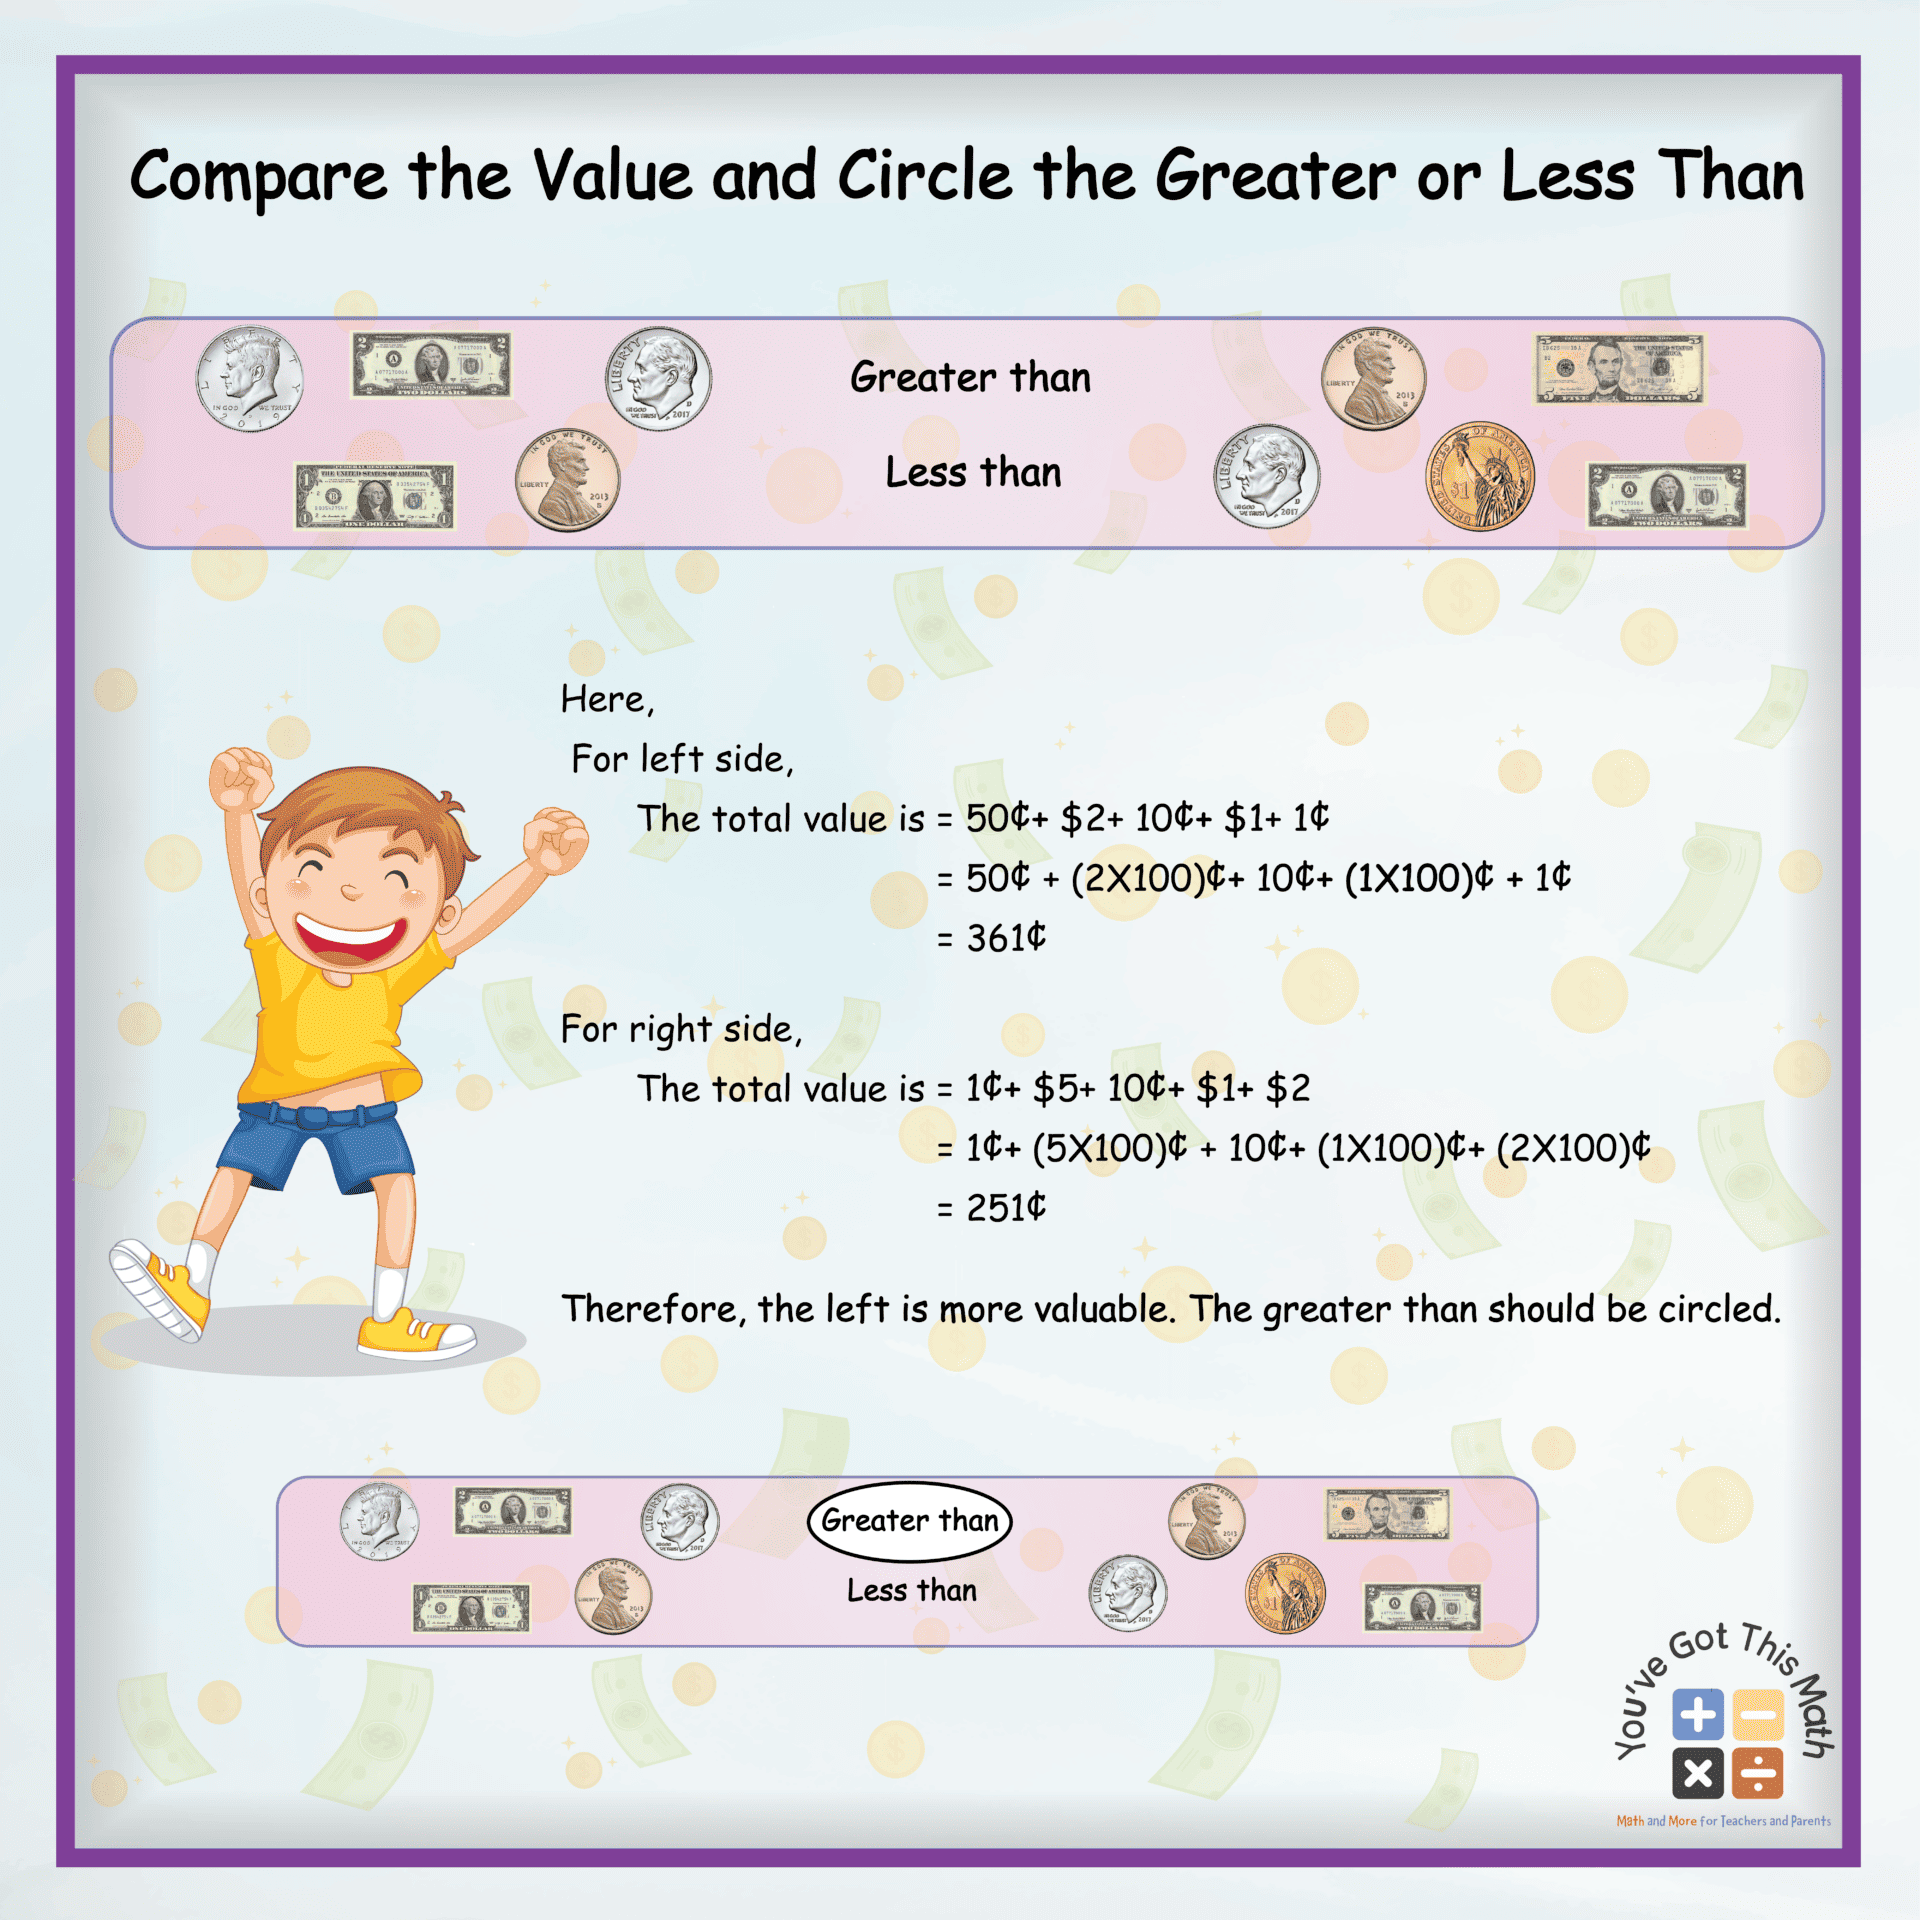 Compare the Value and Circle the Greater or Less Than